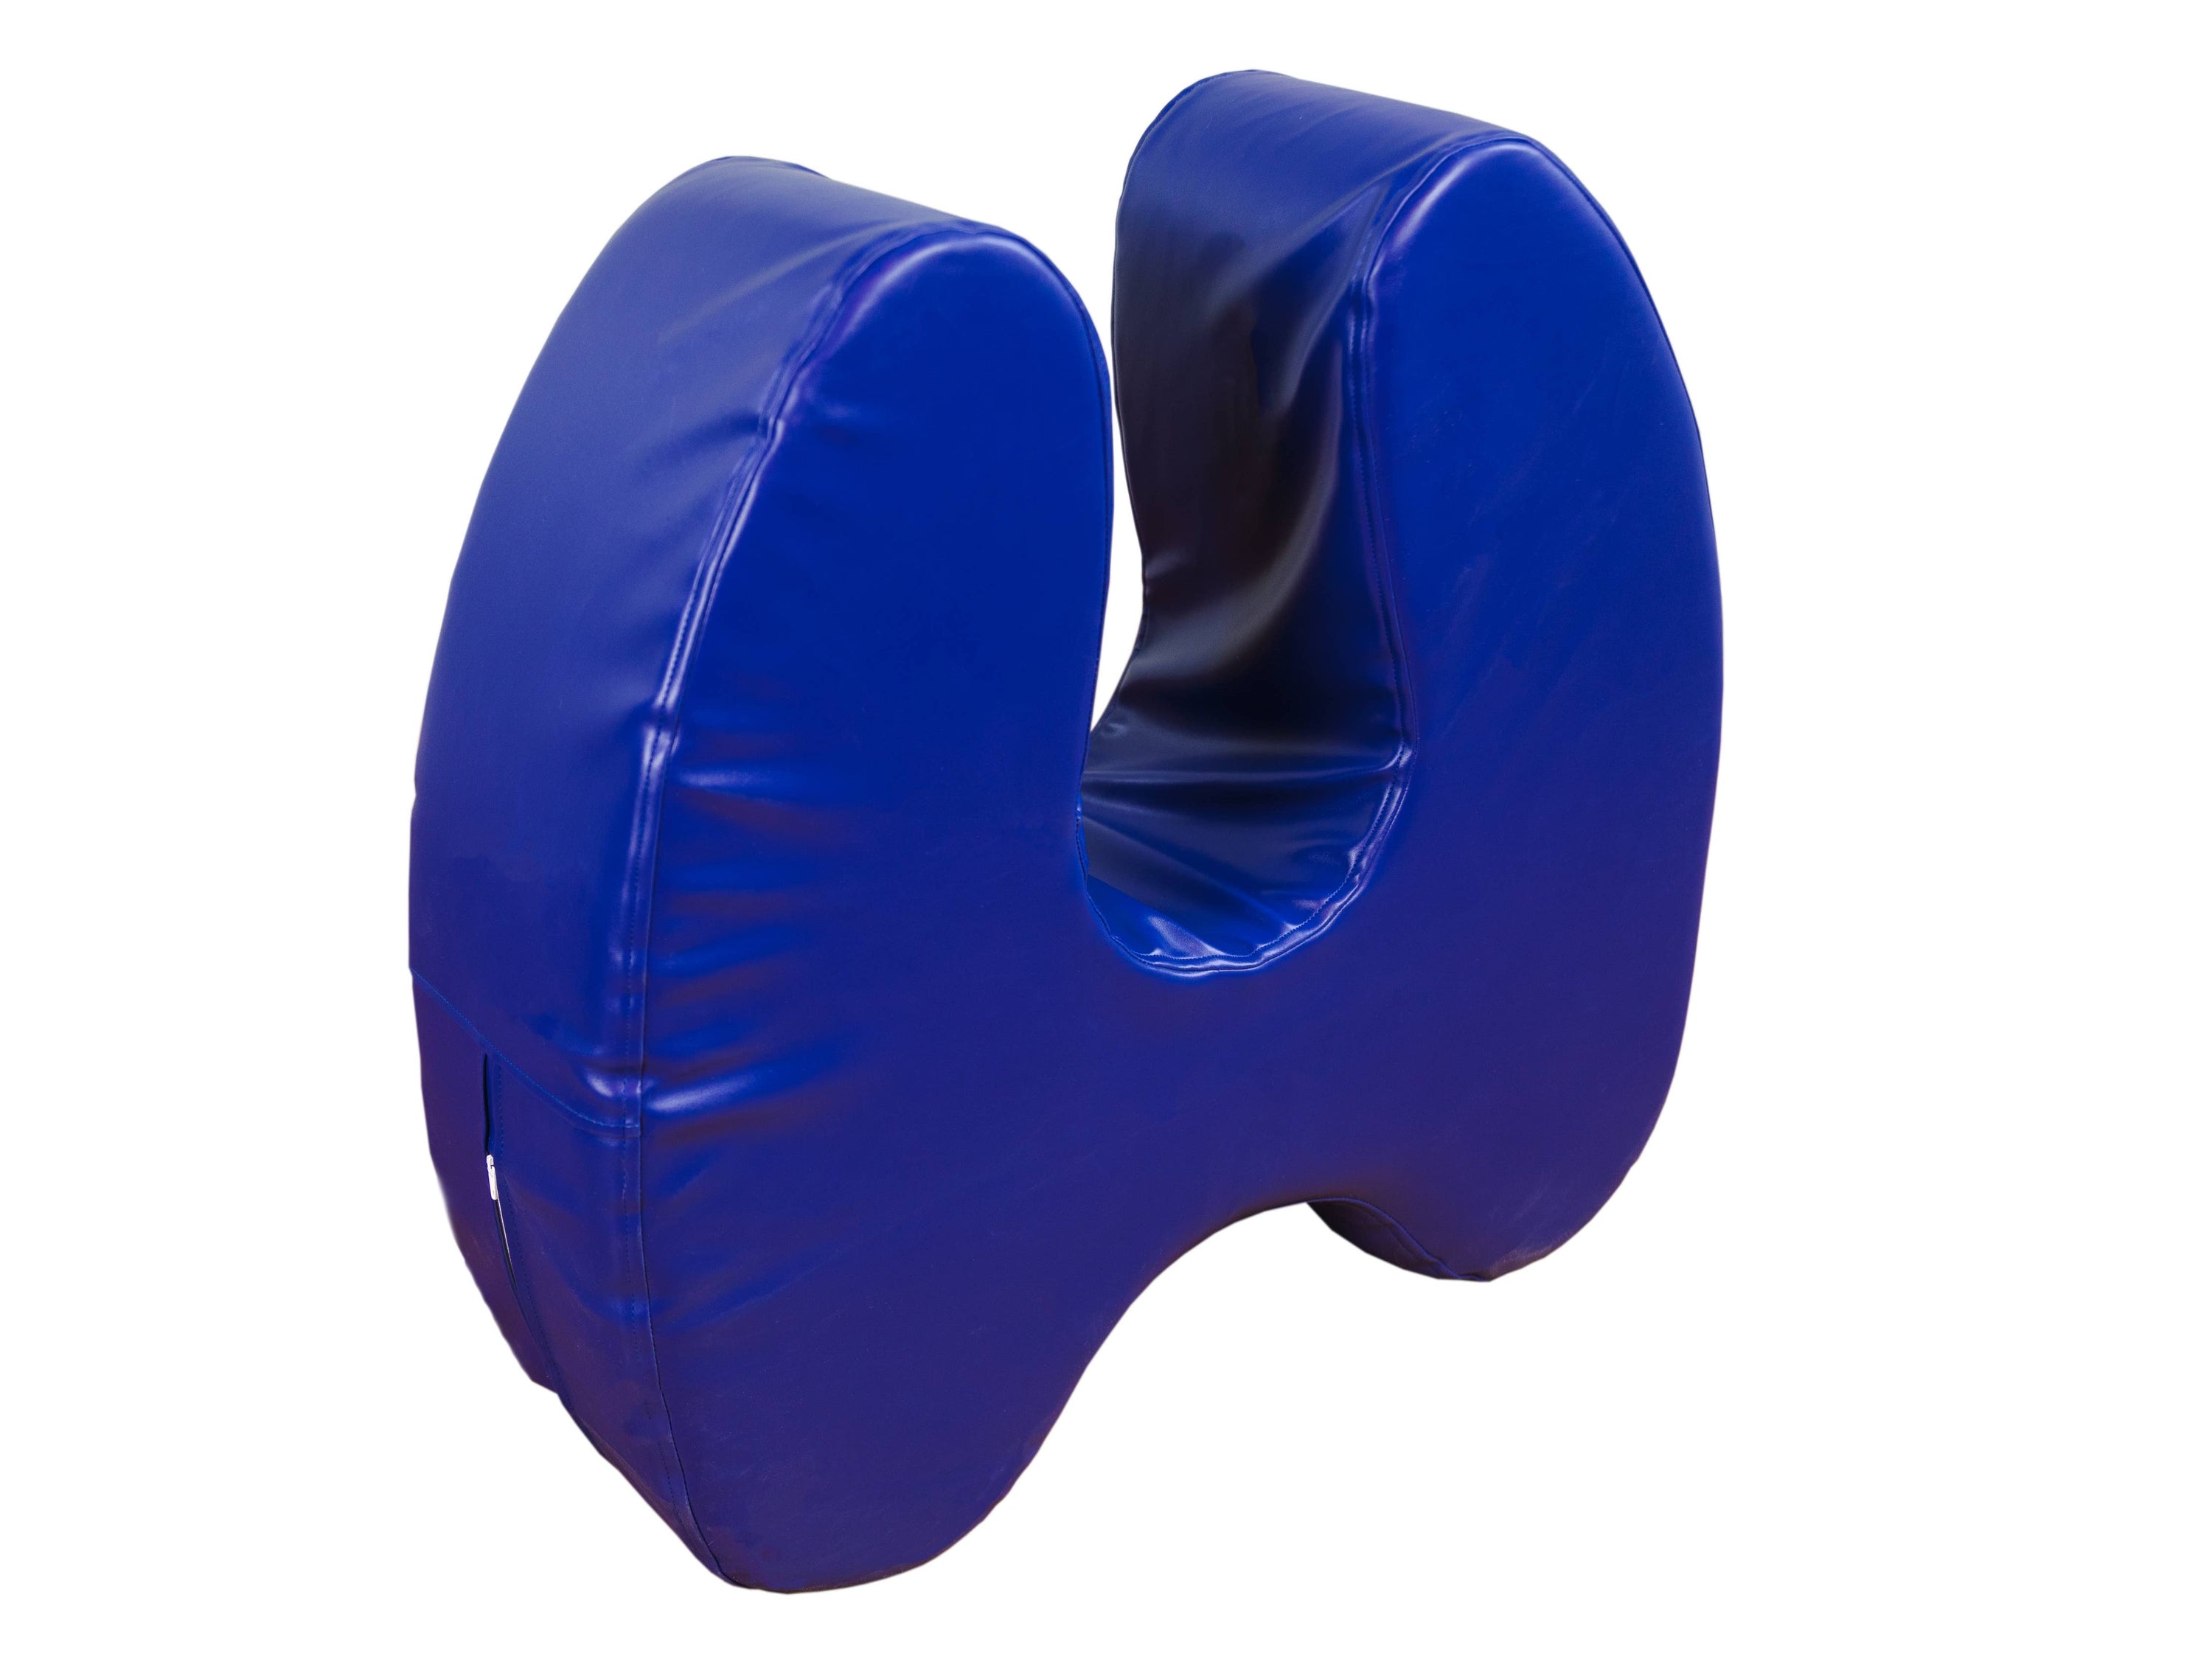 The blue Sensory Soft Squeeze Seat by Bouncyband.